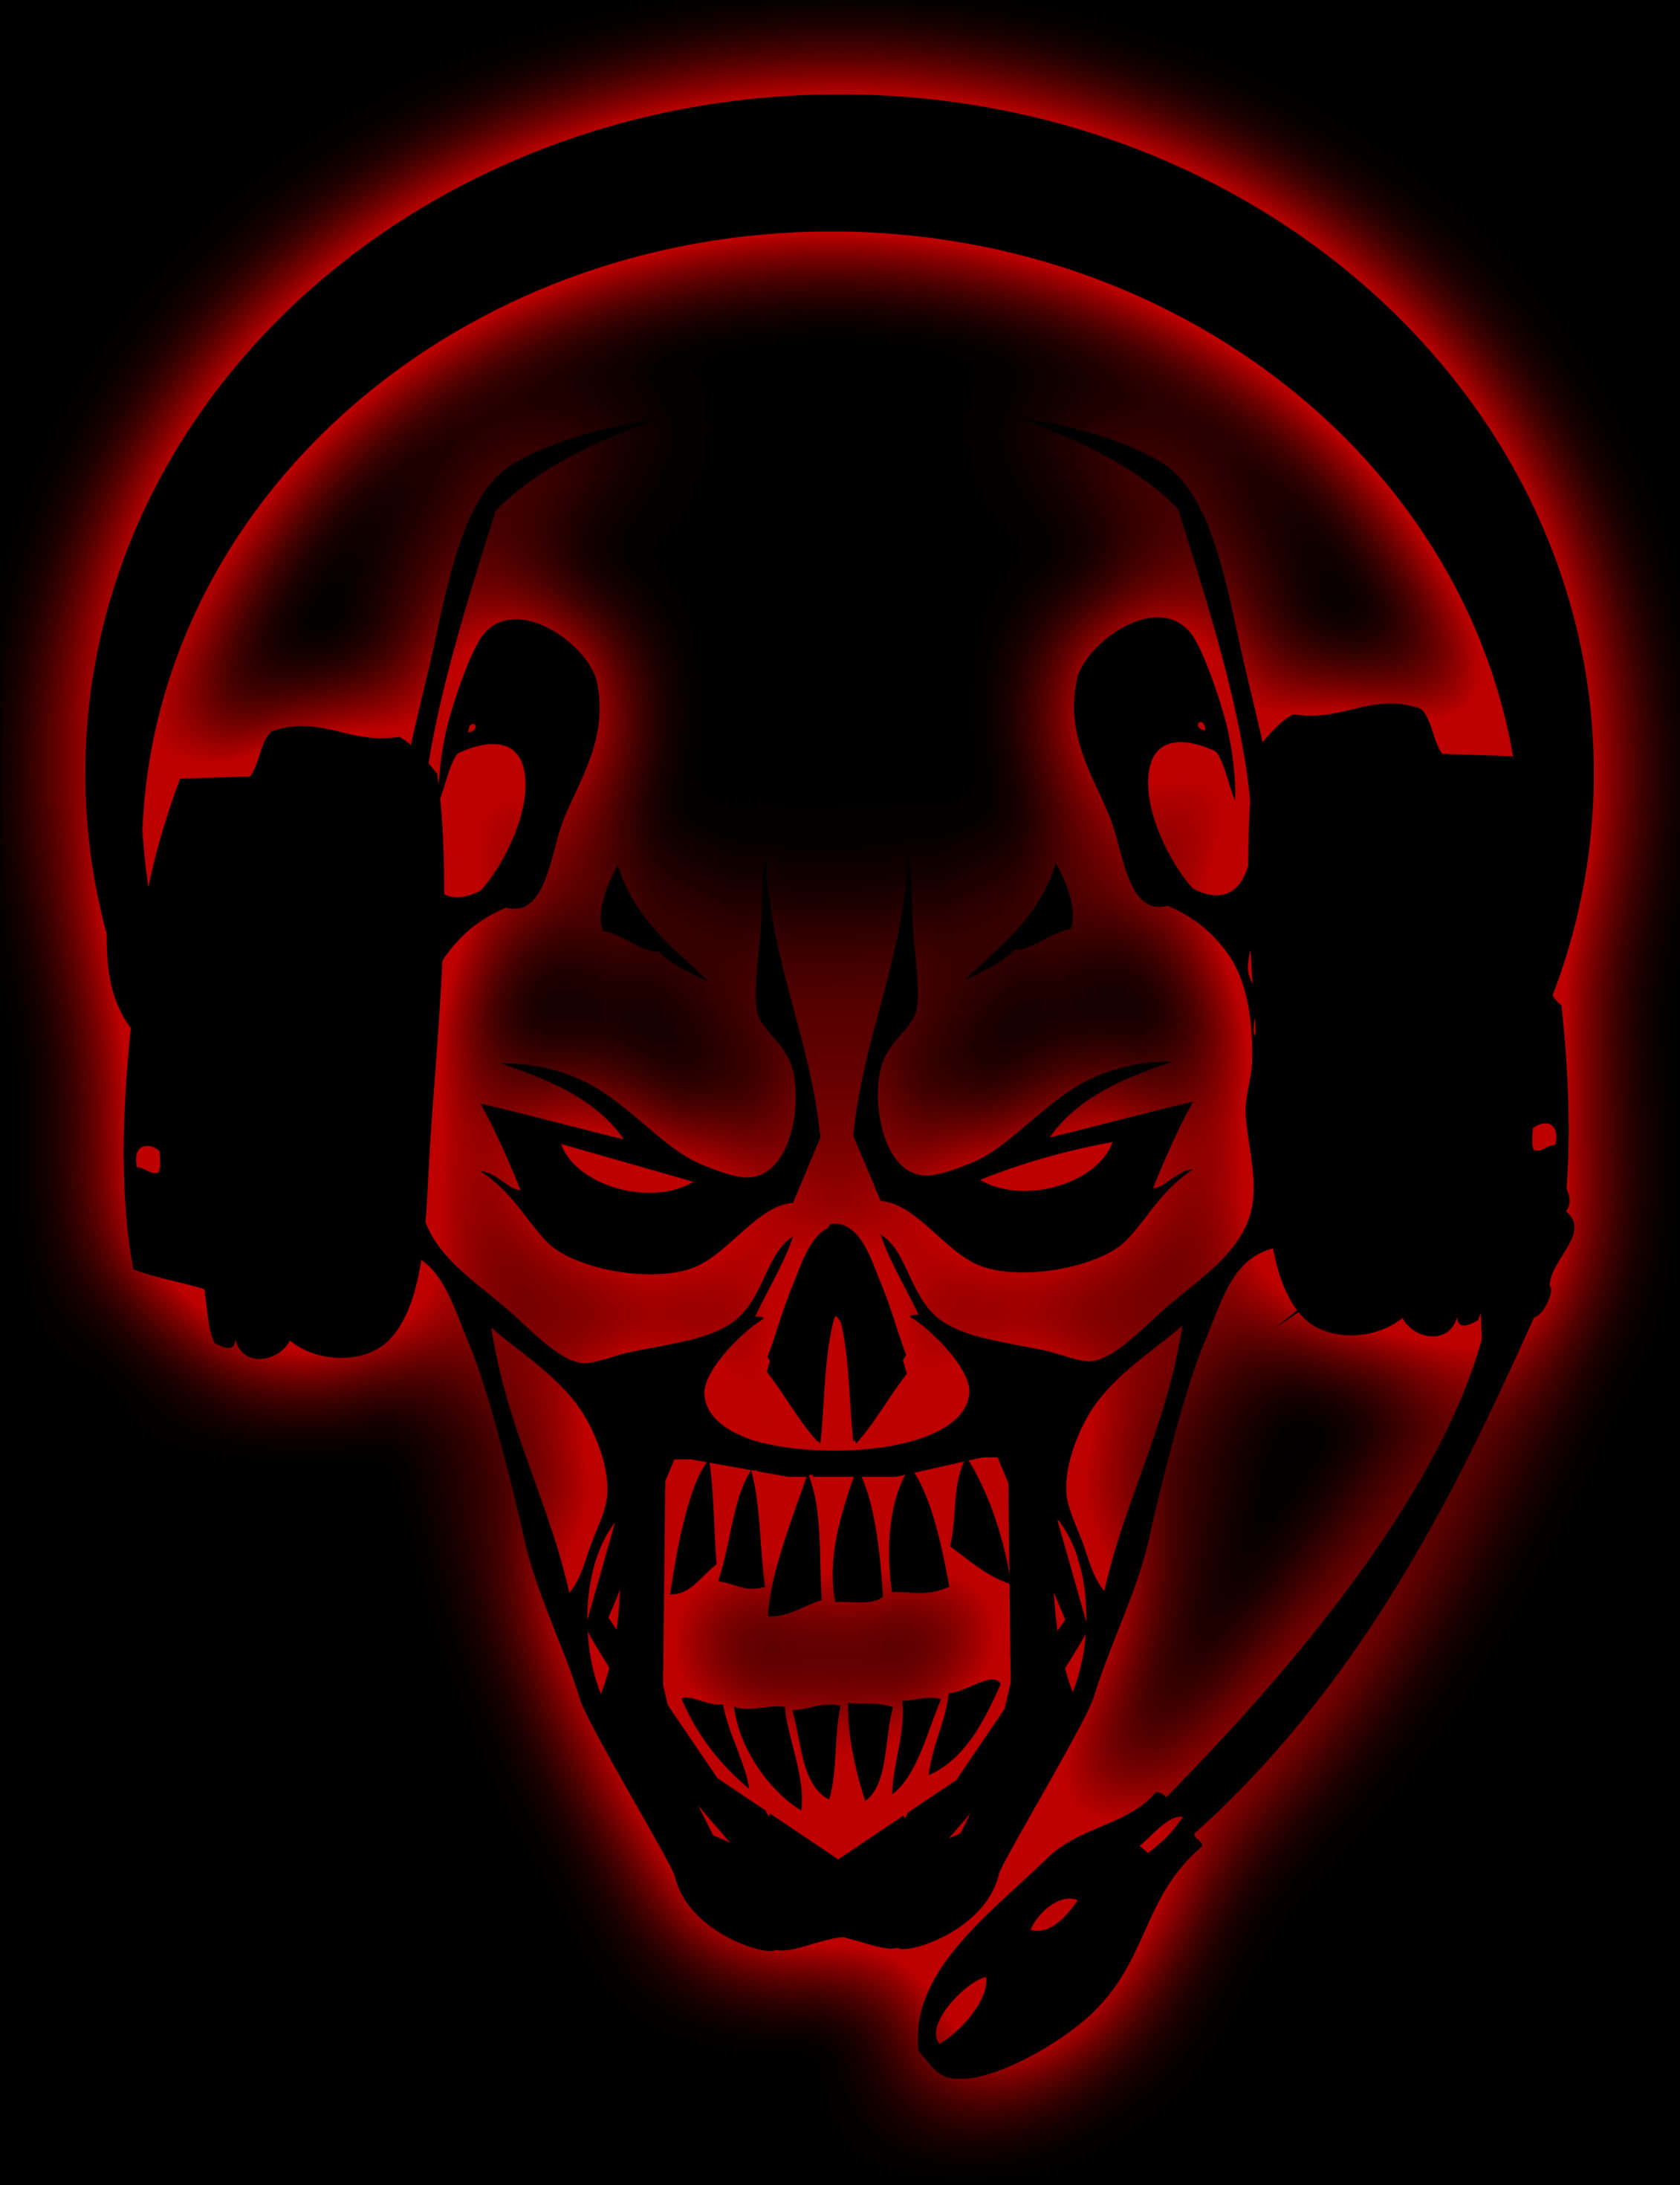 A Skull With Headphones